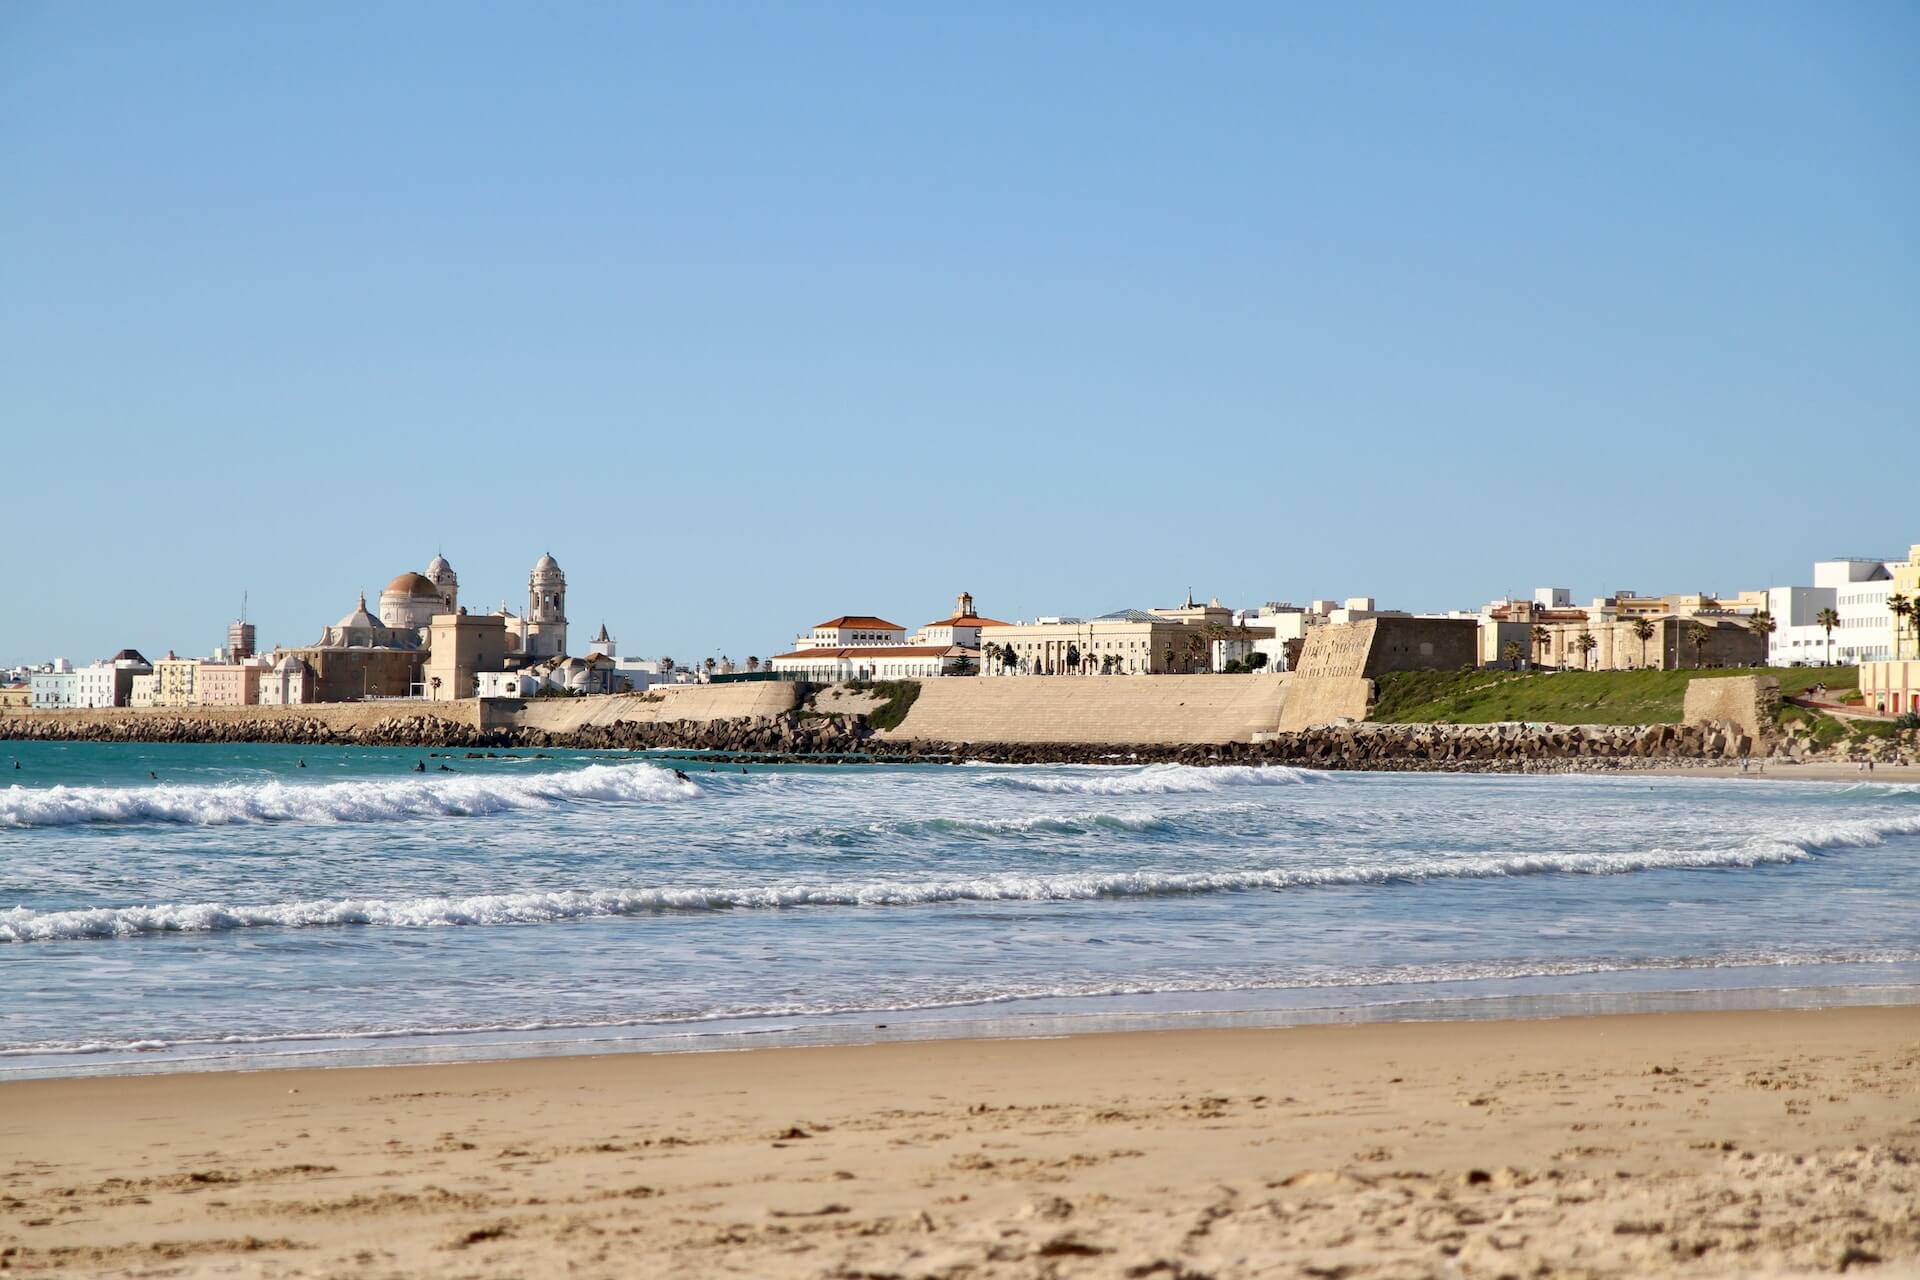 Cádiz is a city in Spain and the capital of the Province of Cádiz, in the autonomous community of Andalusia.